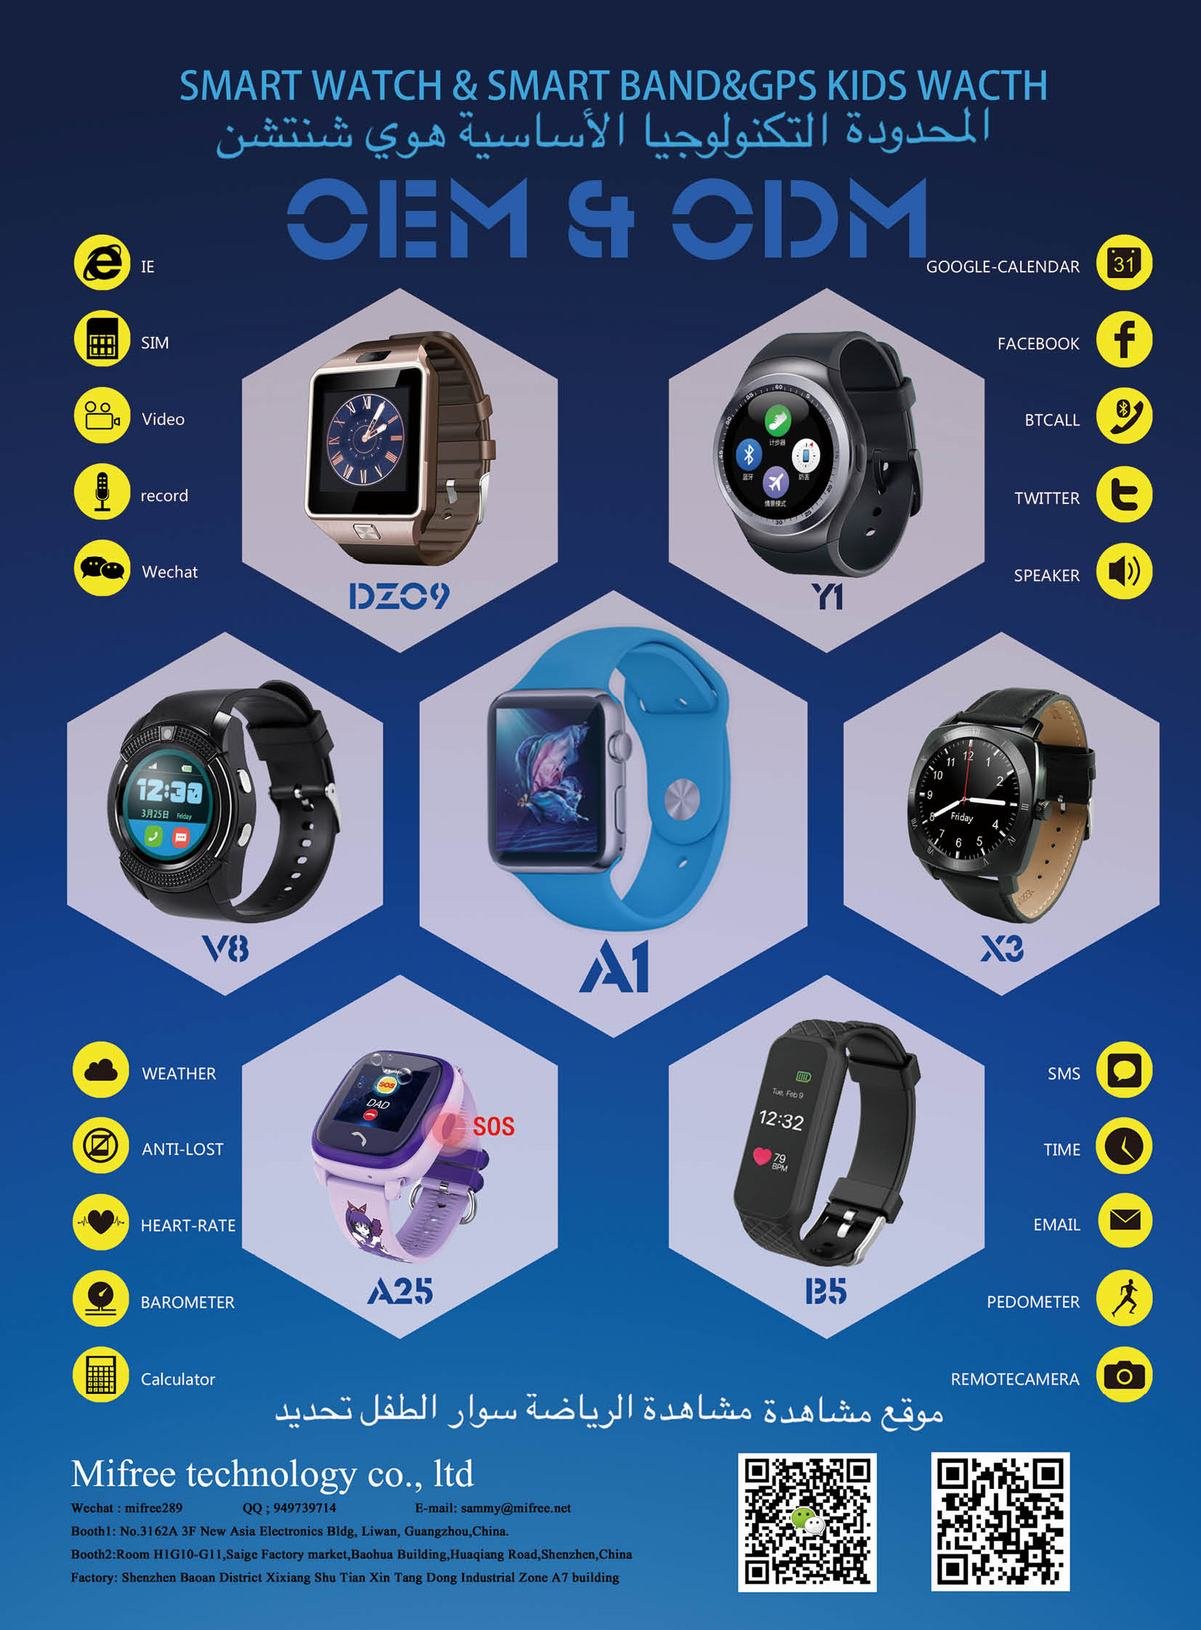 Bluetooth speakers and smart watches